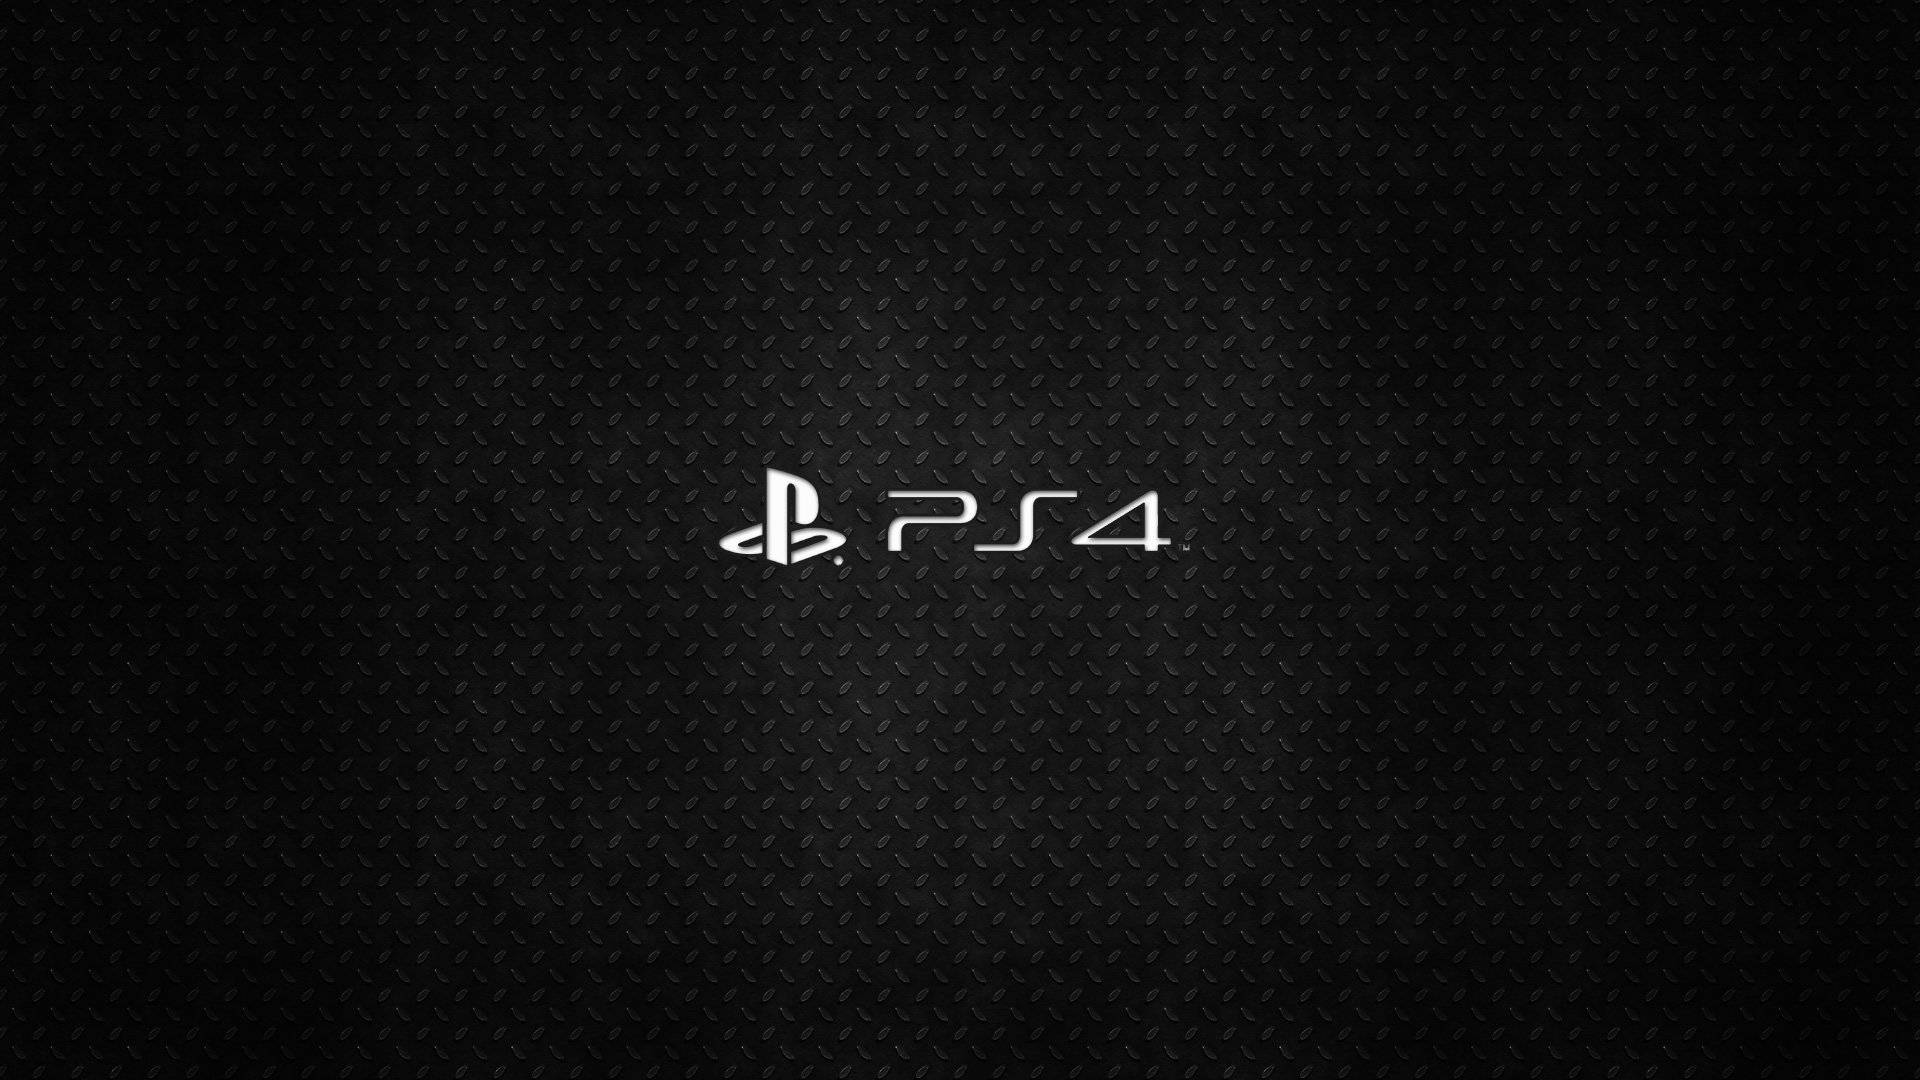 Free Ps4 Wallpaper Downloads, Ps4 Wallpaper for FREE